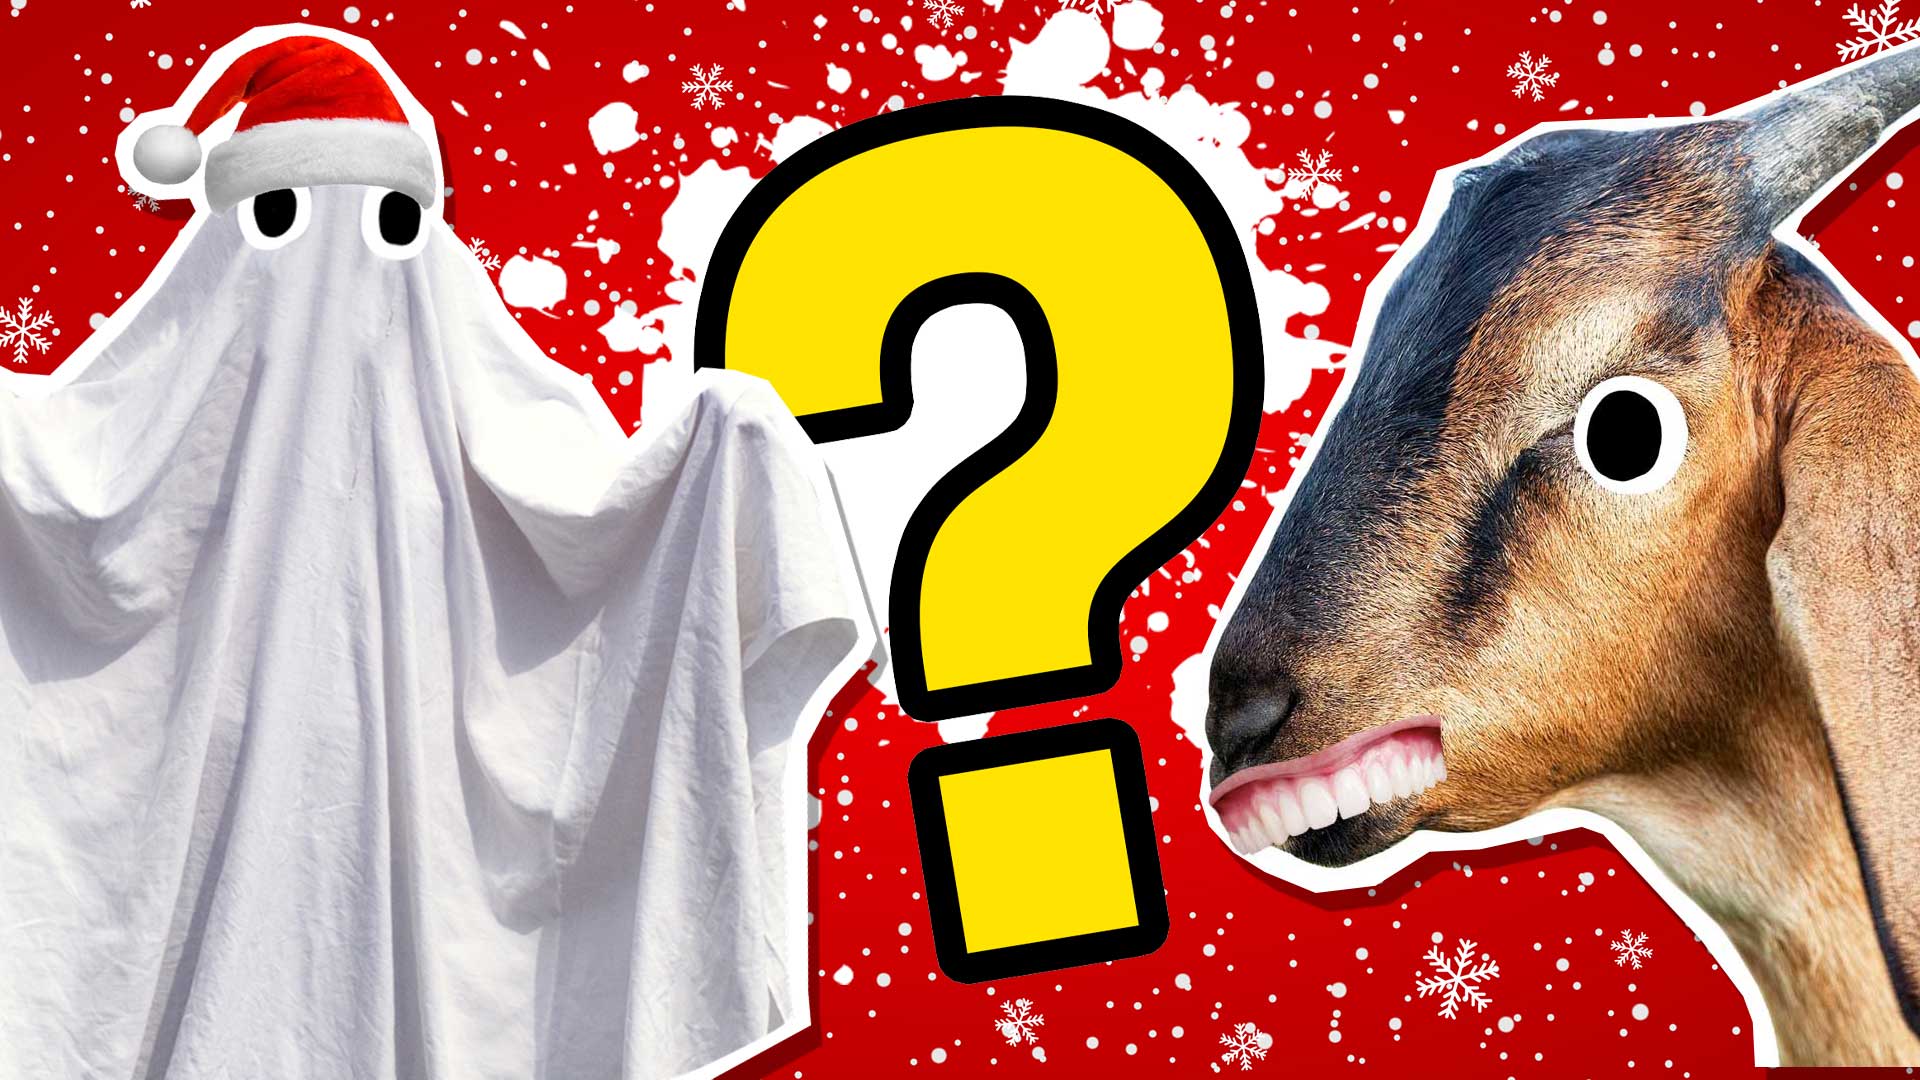 Are You the G.O.A.T of Christmas Present or a Goat?